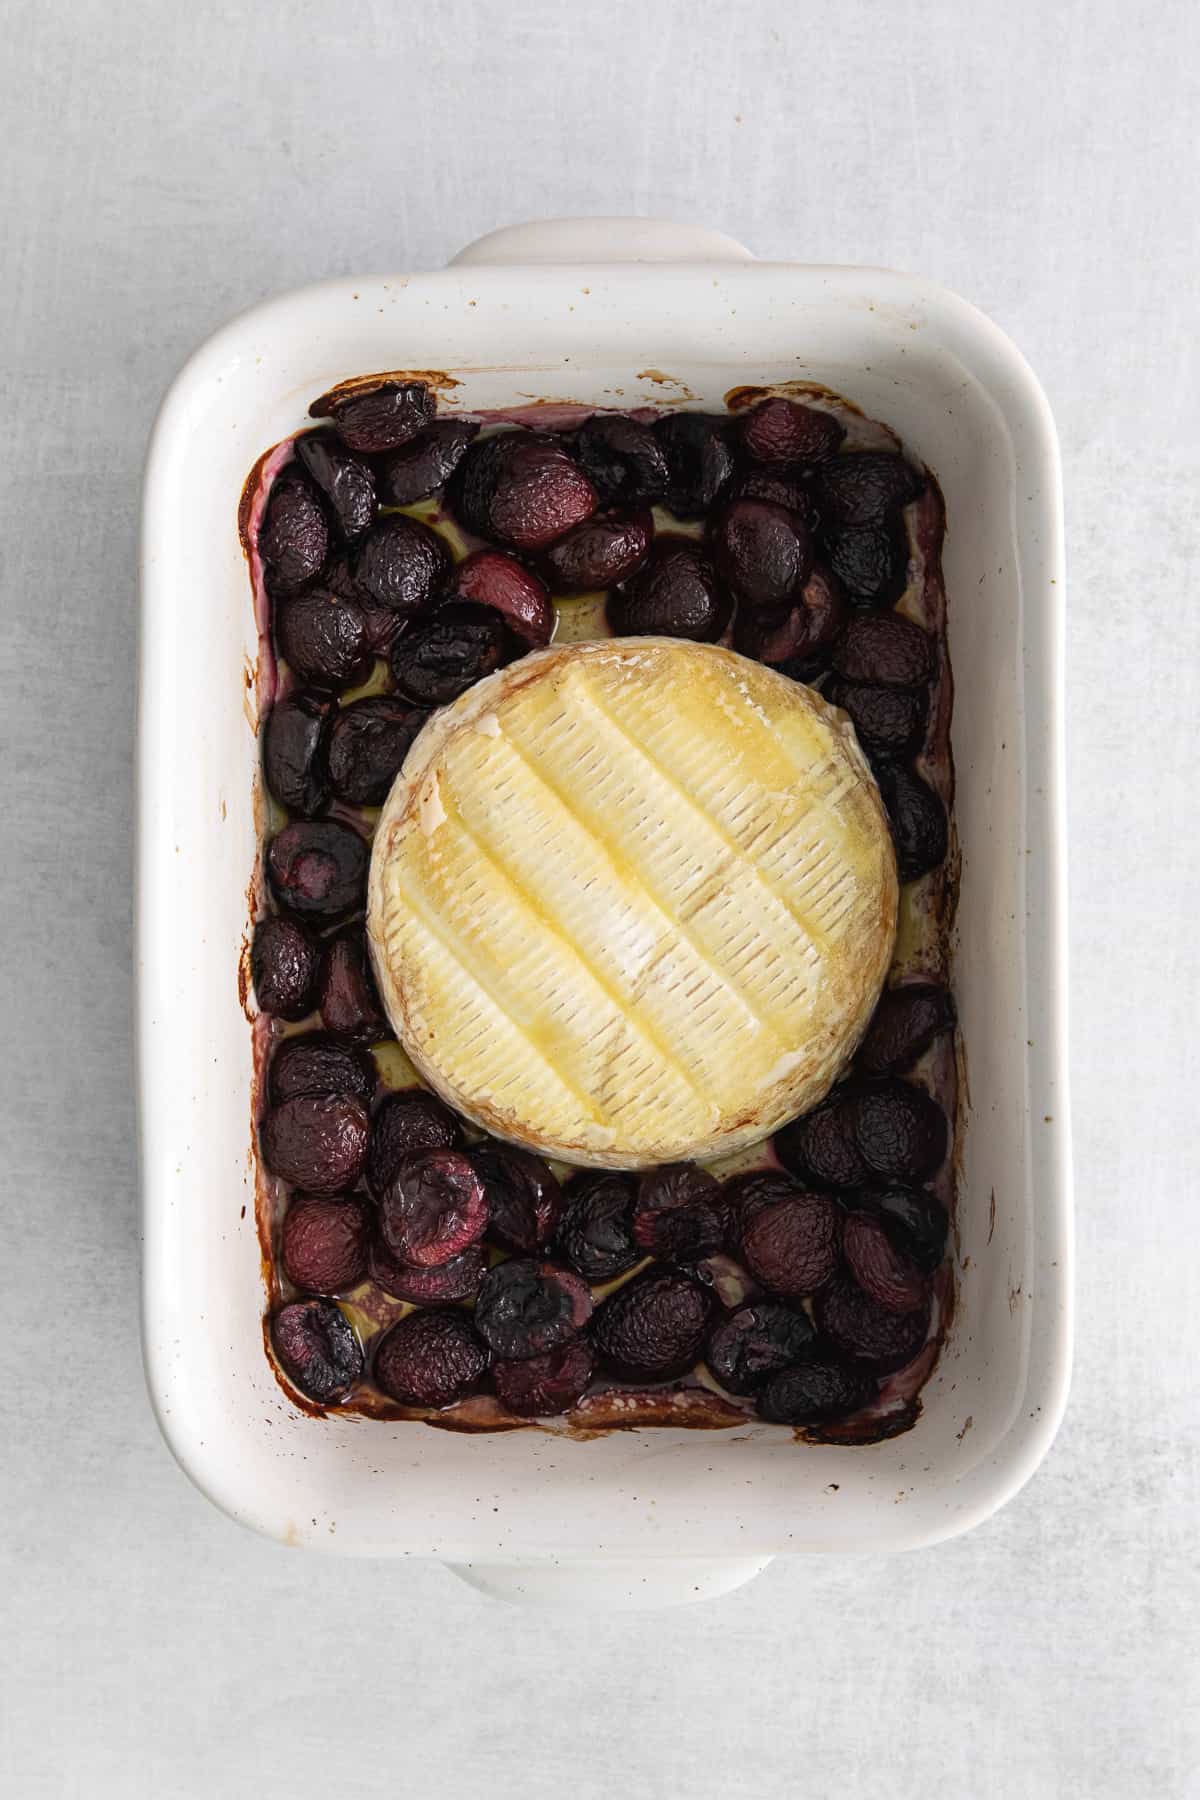 Grilled brie cheese and cherries in a baking dish.